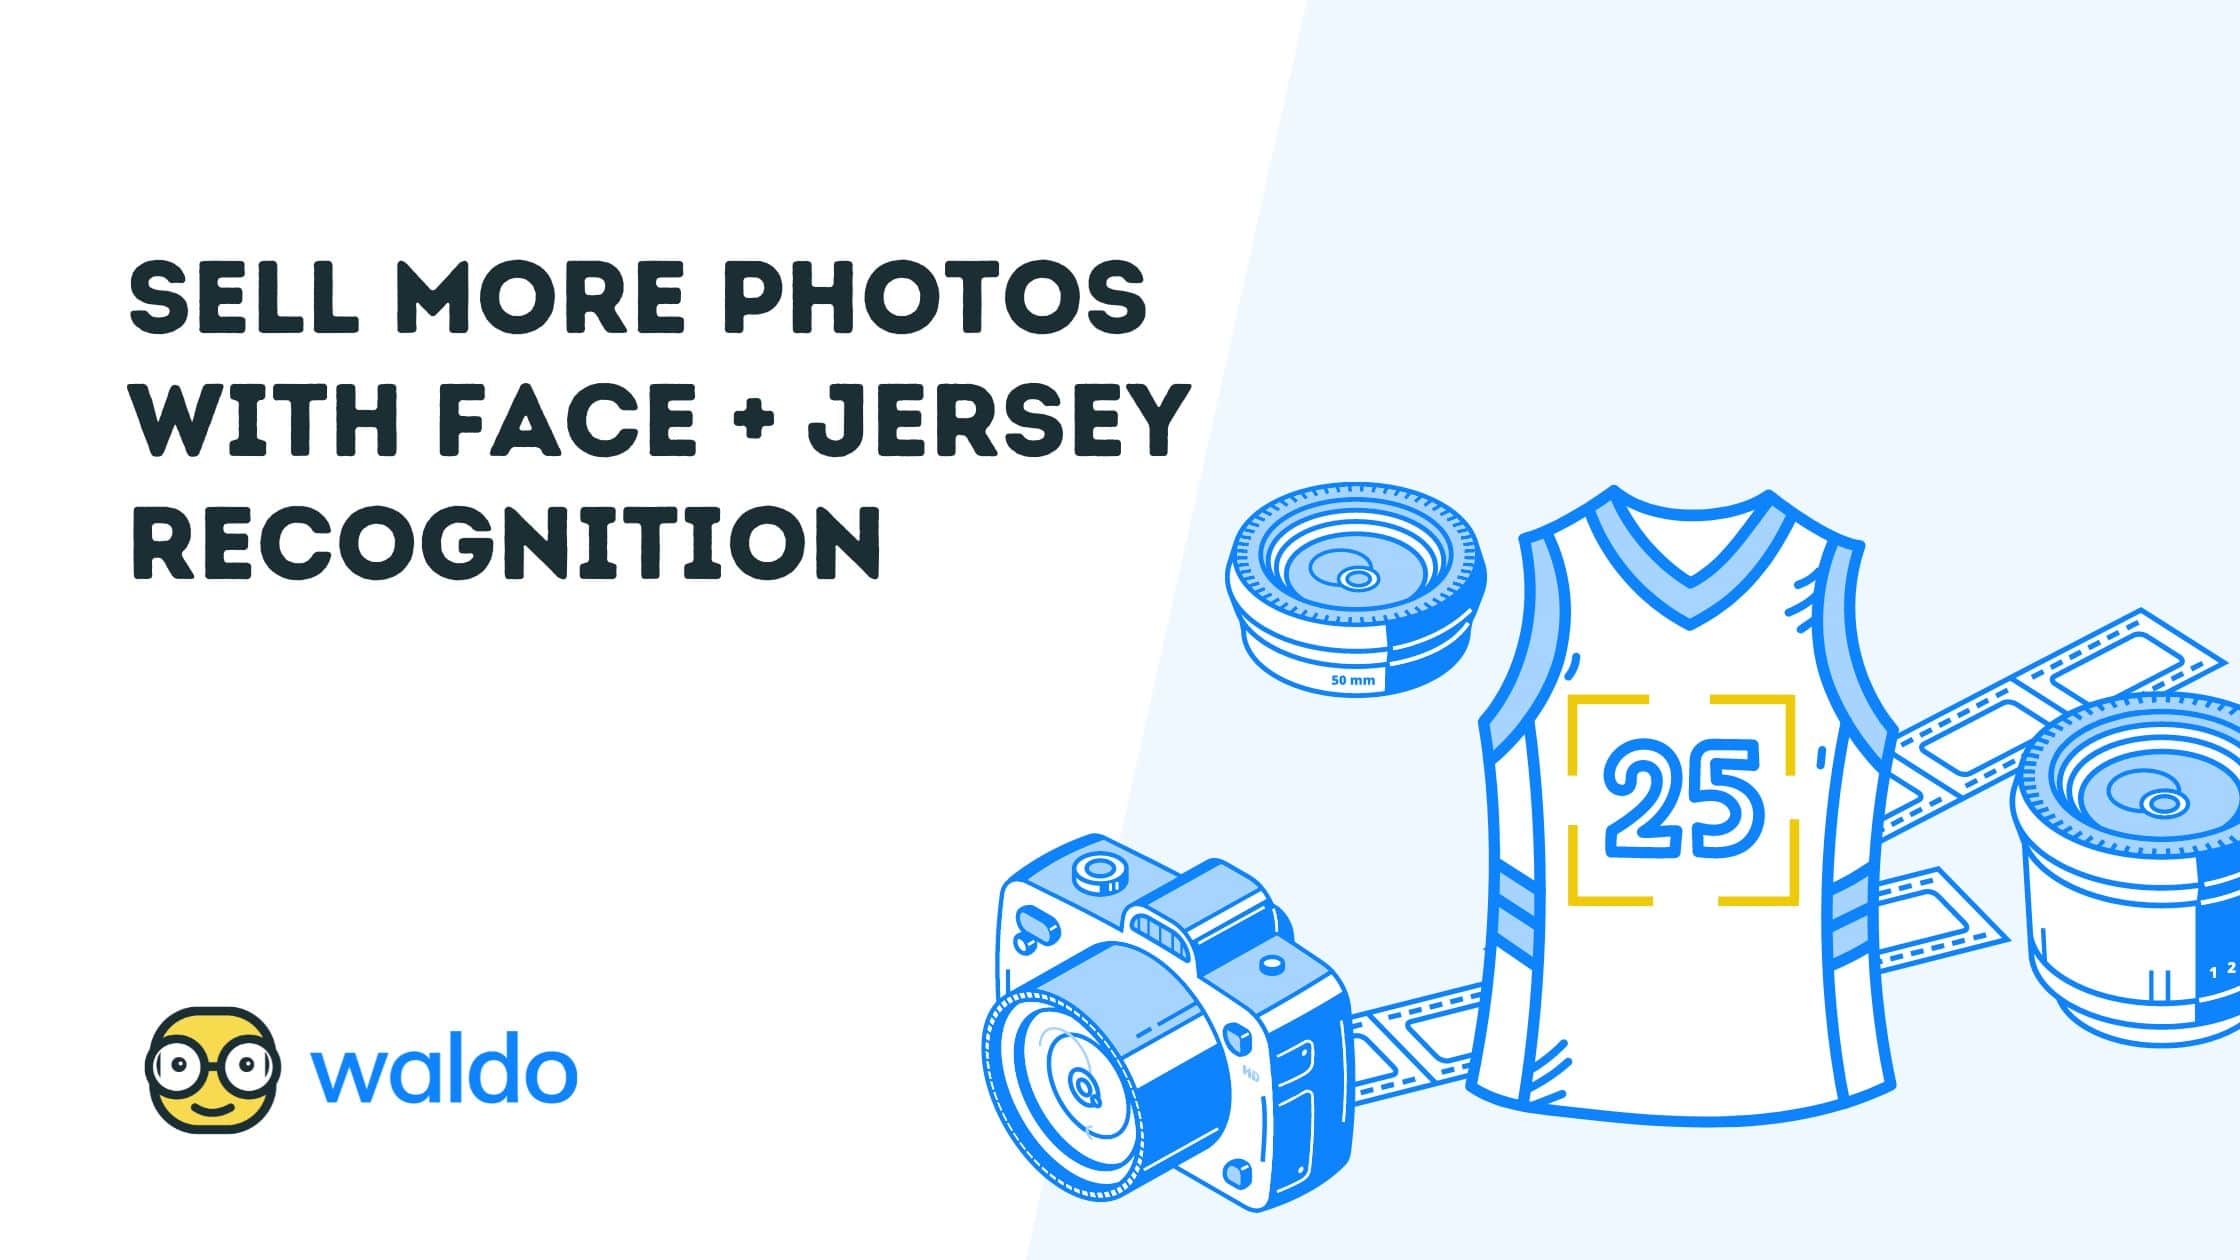 Calling All Sports, Performance, and Event Photographers! Sell More Photos in One Easy Step